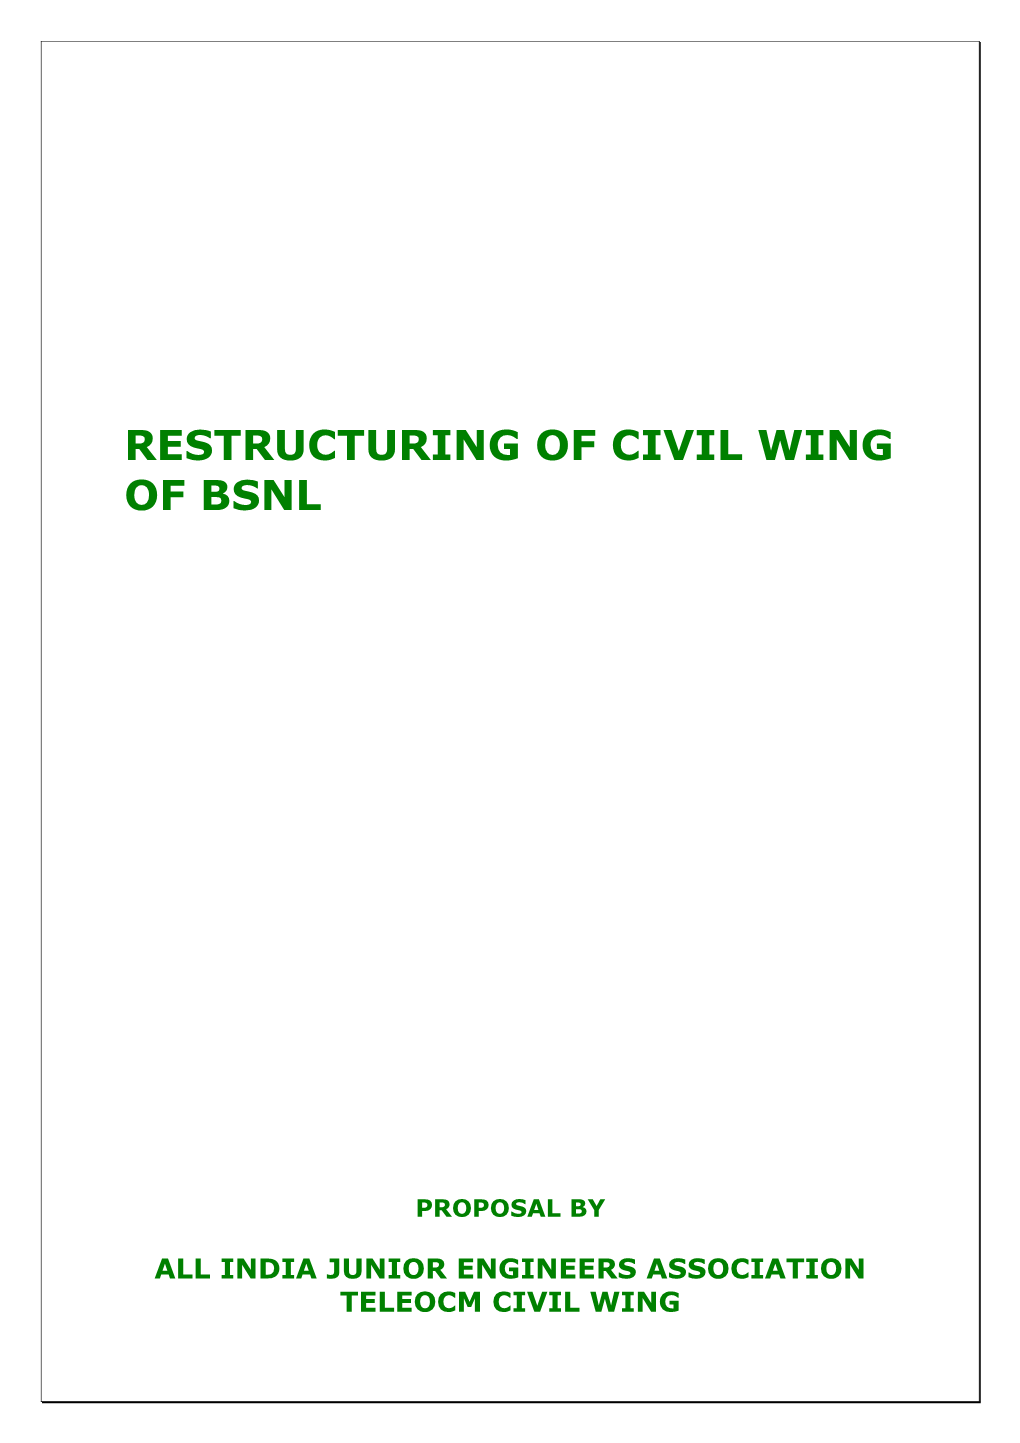 Restructuring of Civil Wing of BSNL